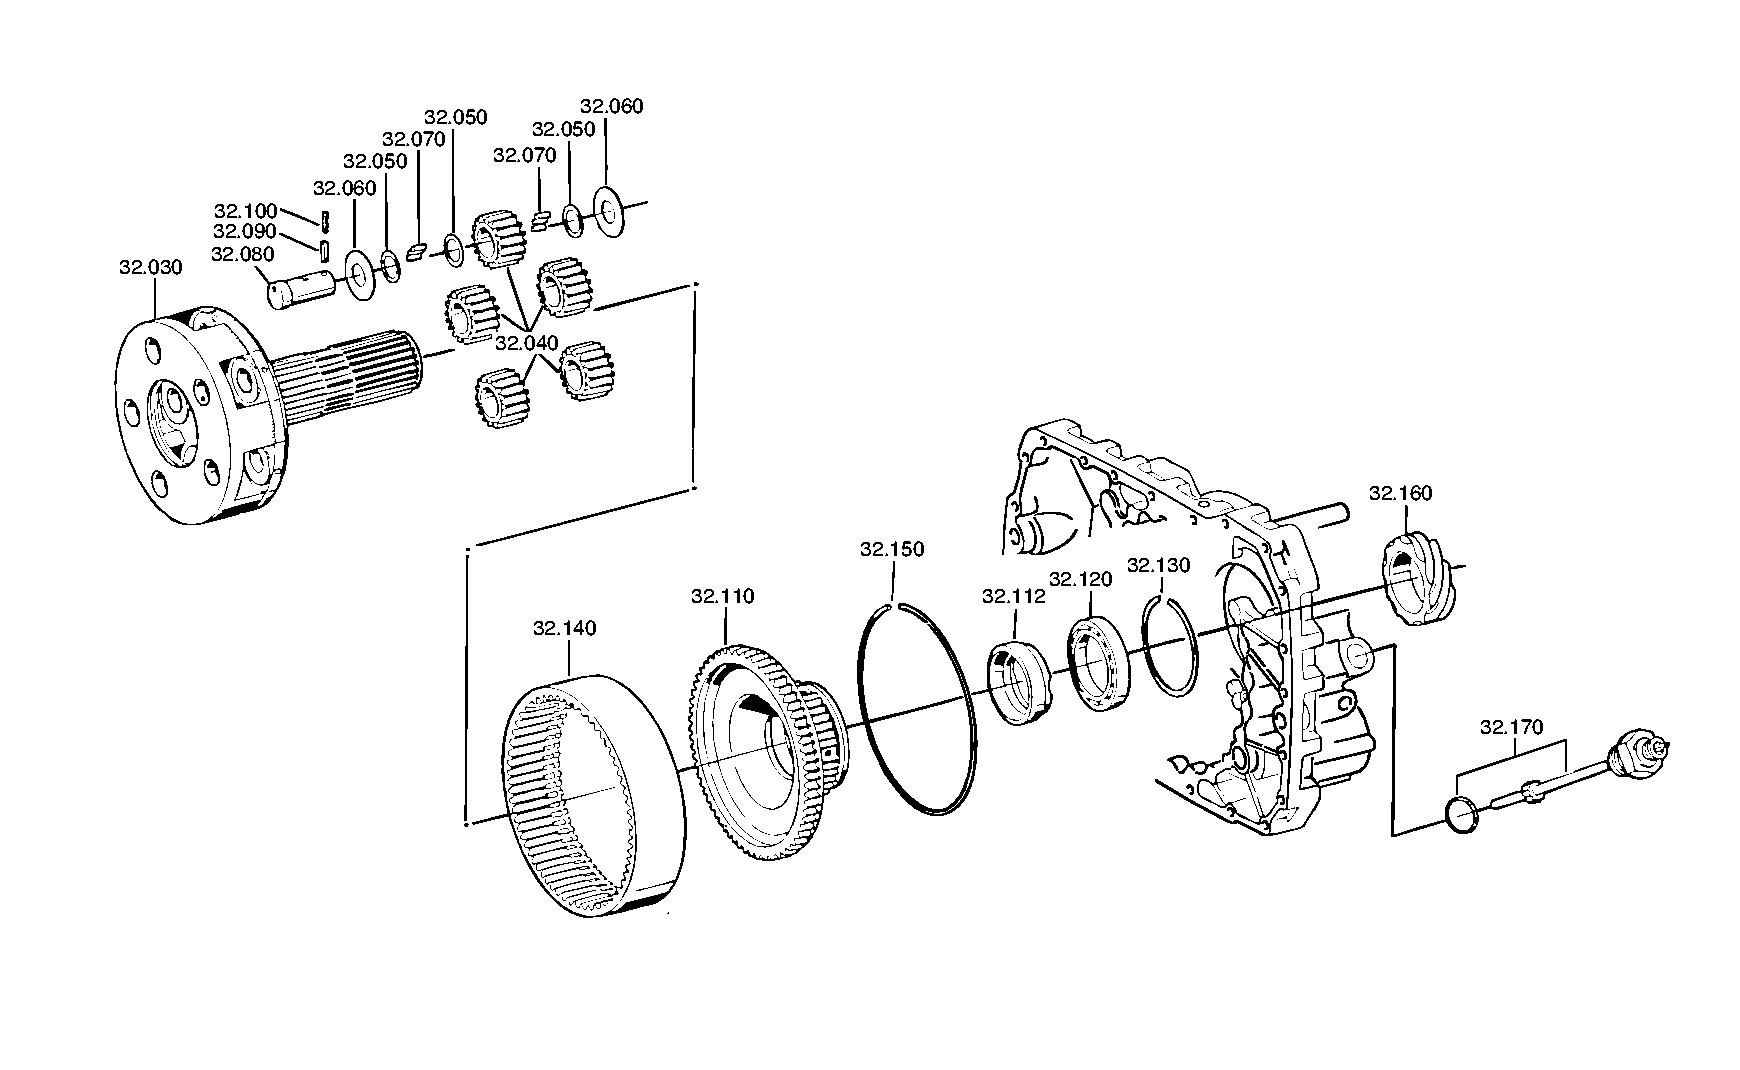 drawing for DAF 69774 - HEXAGON SCREW (figure 4)